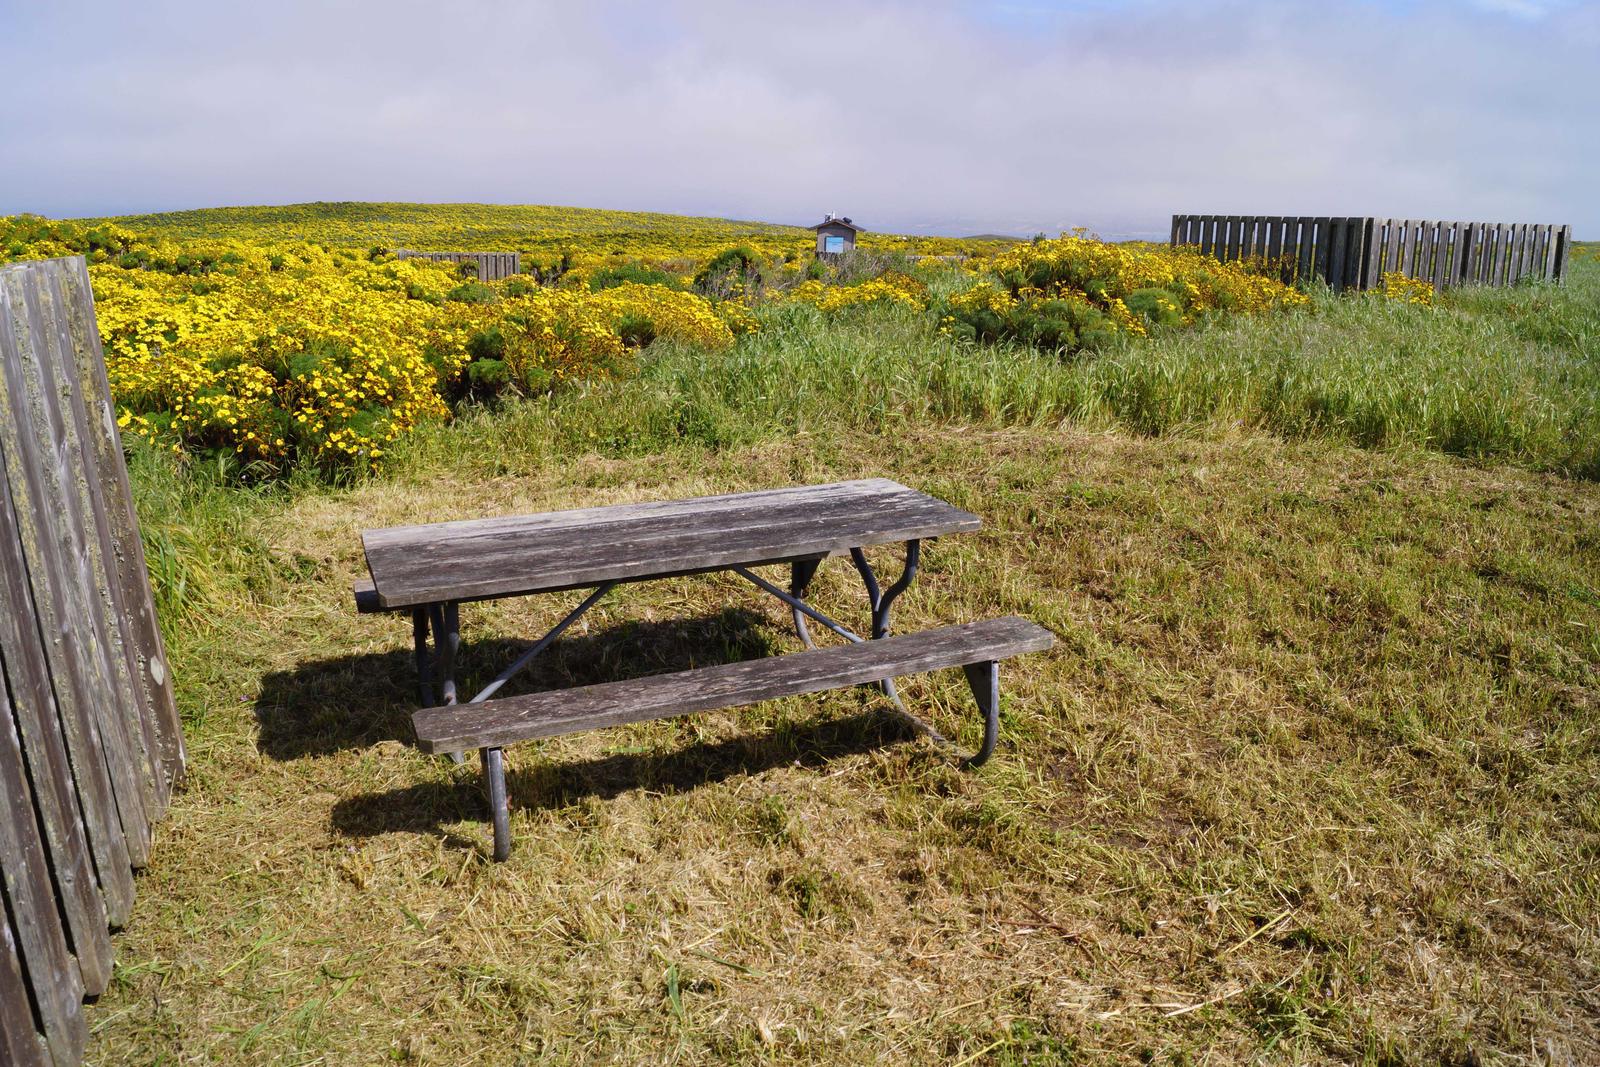 Picnic table and windbreak surrounded by grass and yellow flowered plant. SAN MIGUEL ISLAND AREA - 007
